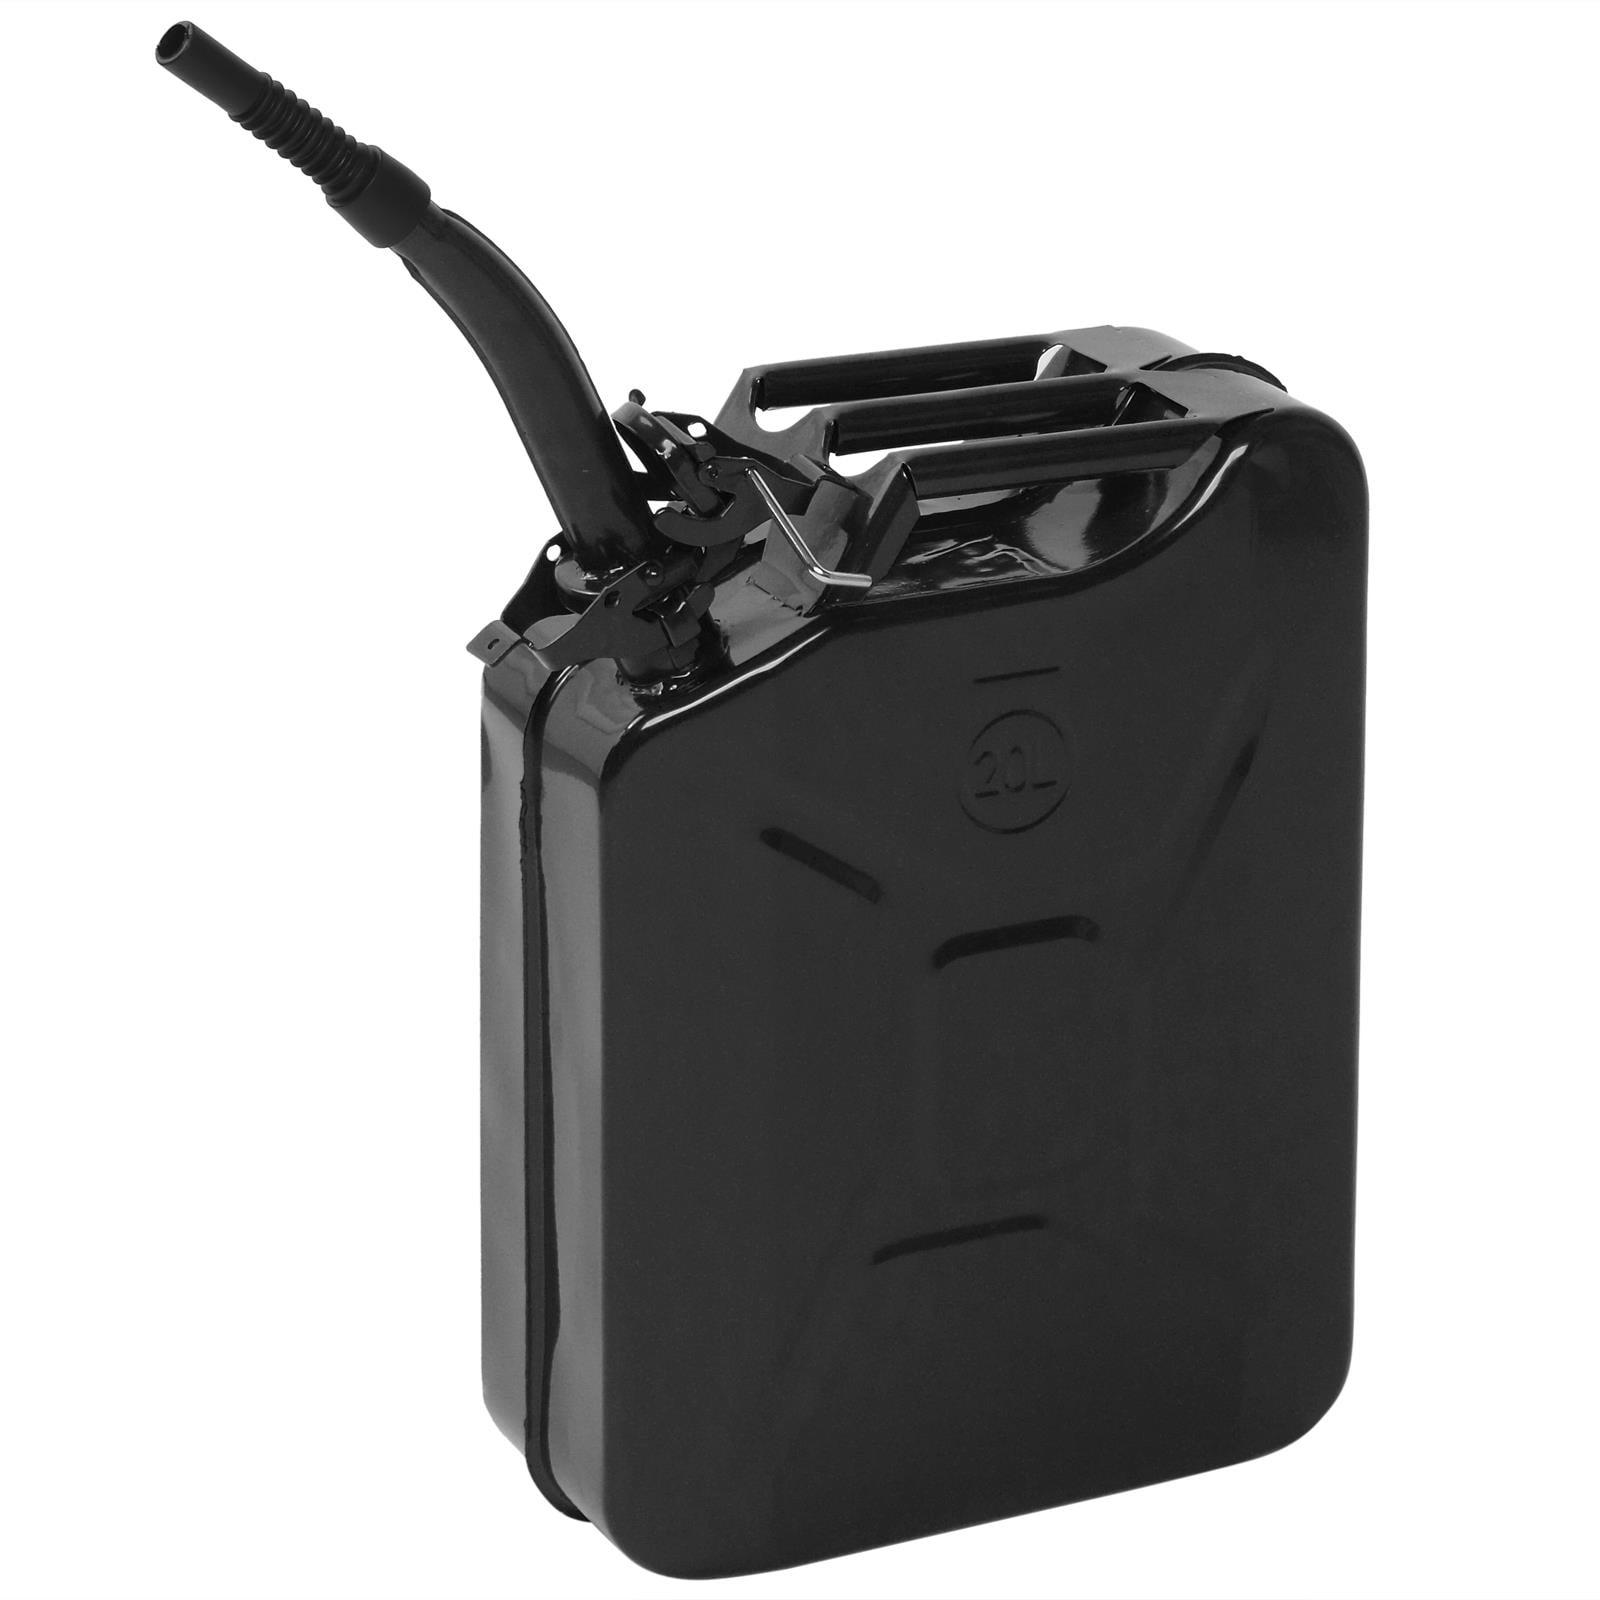 Ktaxon Portable Jerry Can Emergency Fuel Container, 20L Capacity